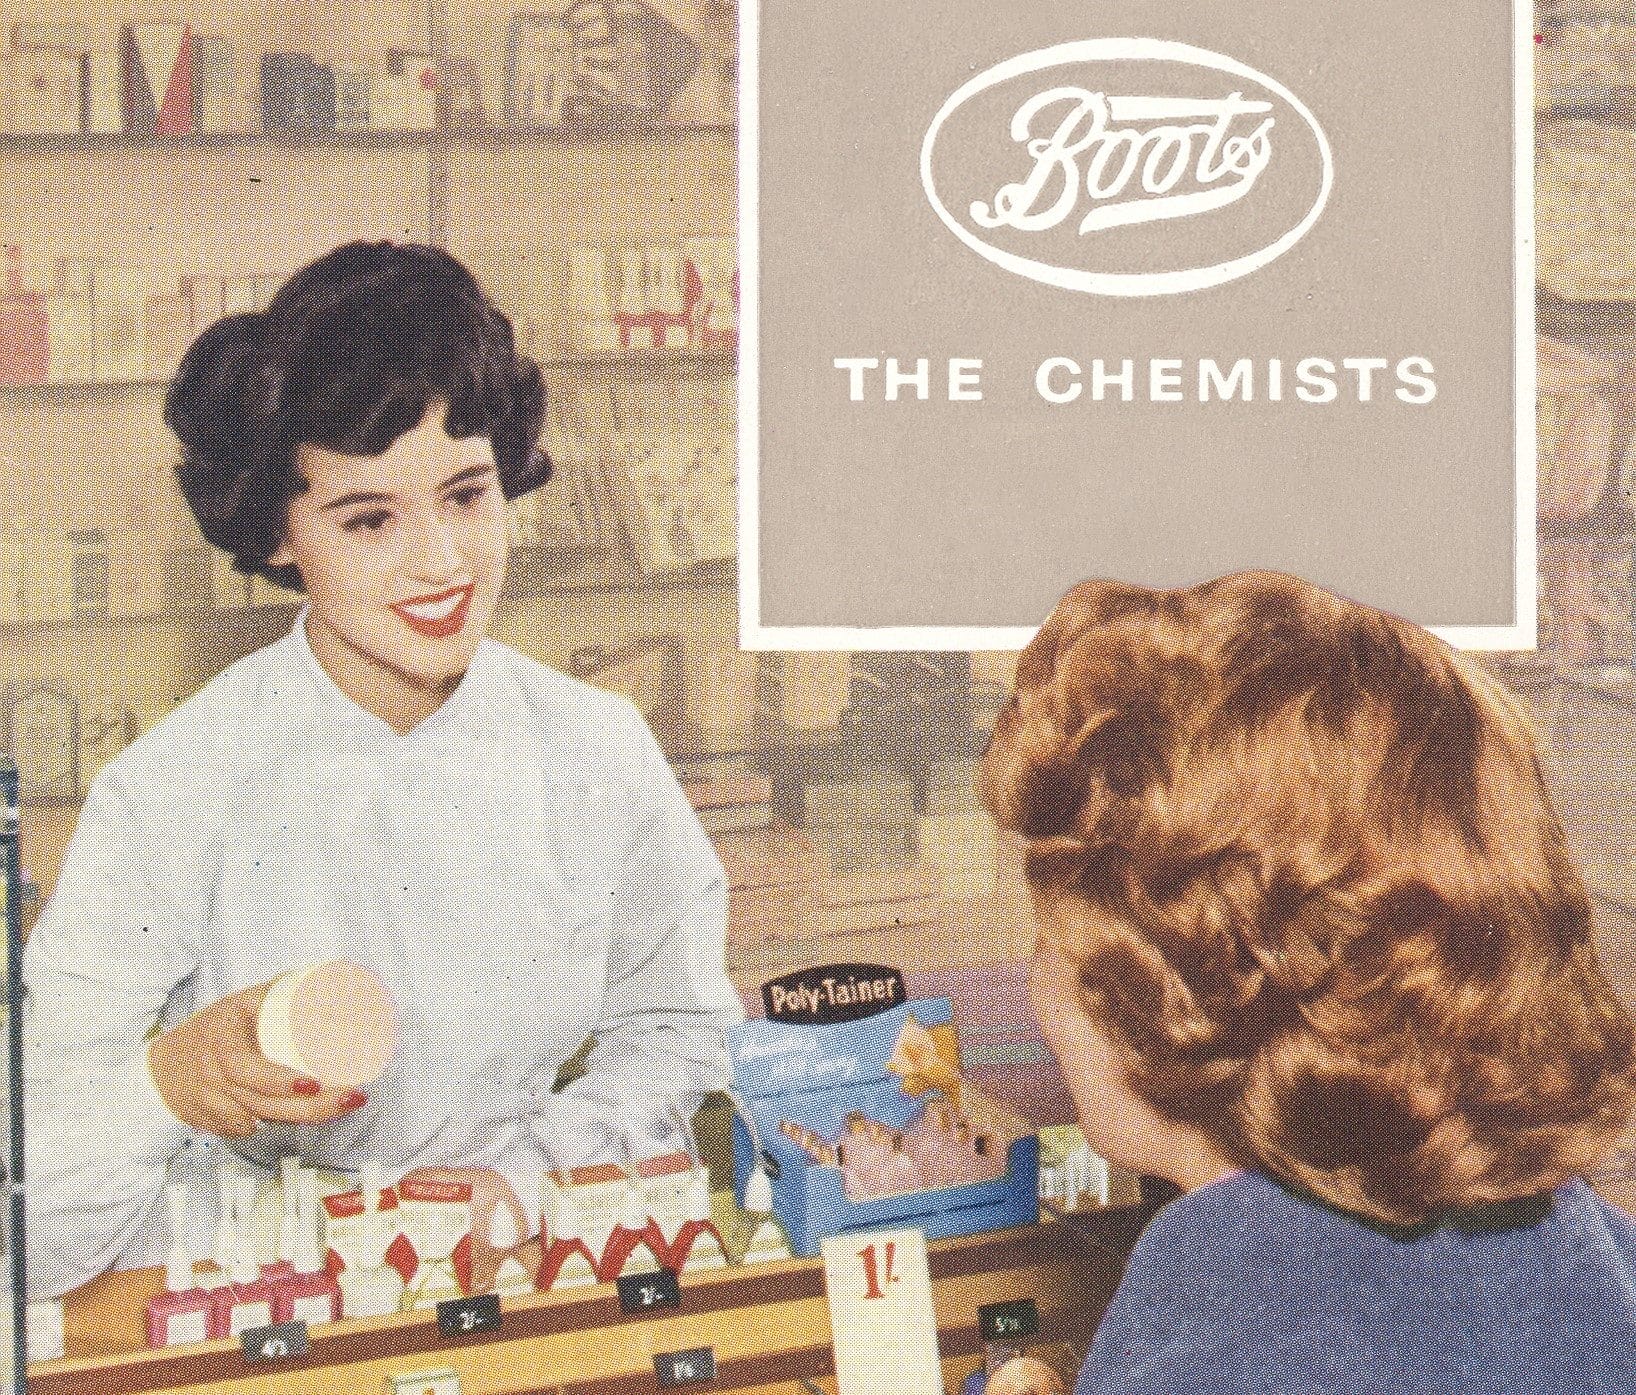 An old poster from Boots where two women converse over a pharmacy counter